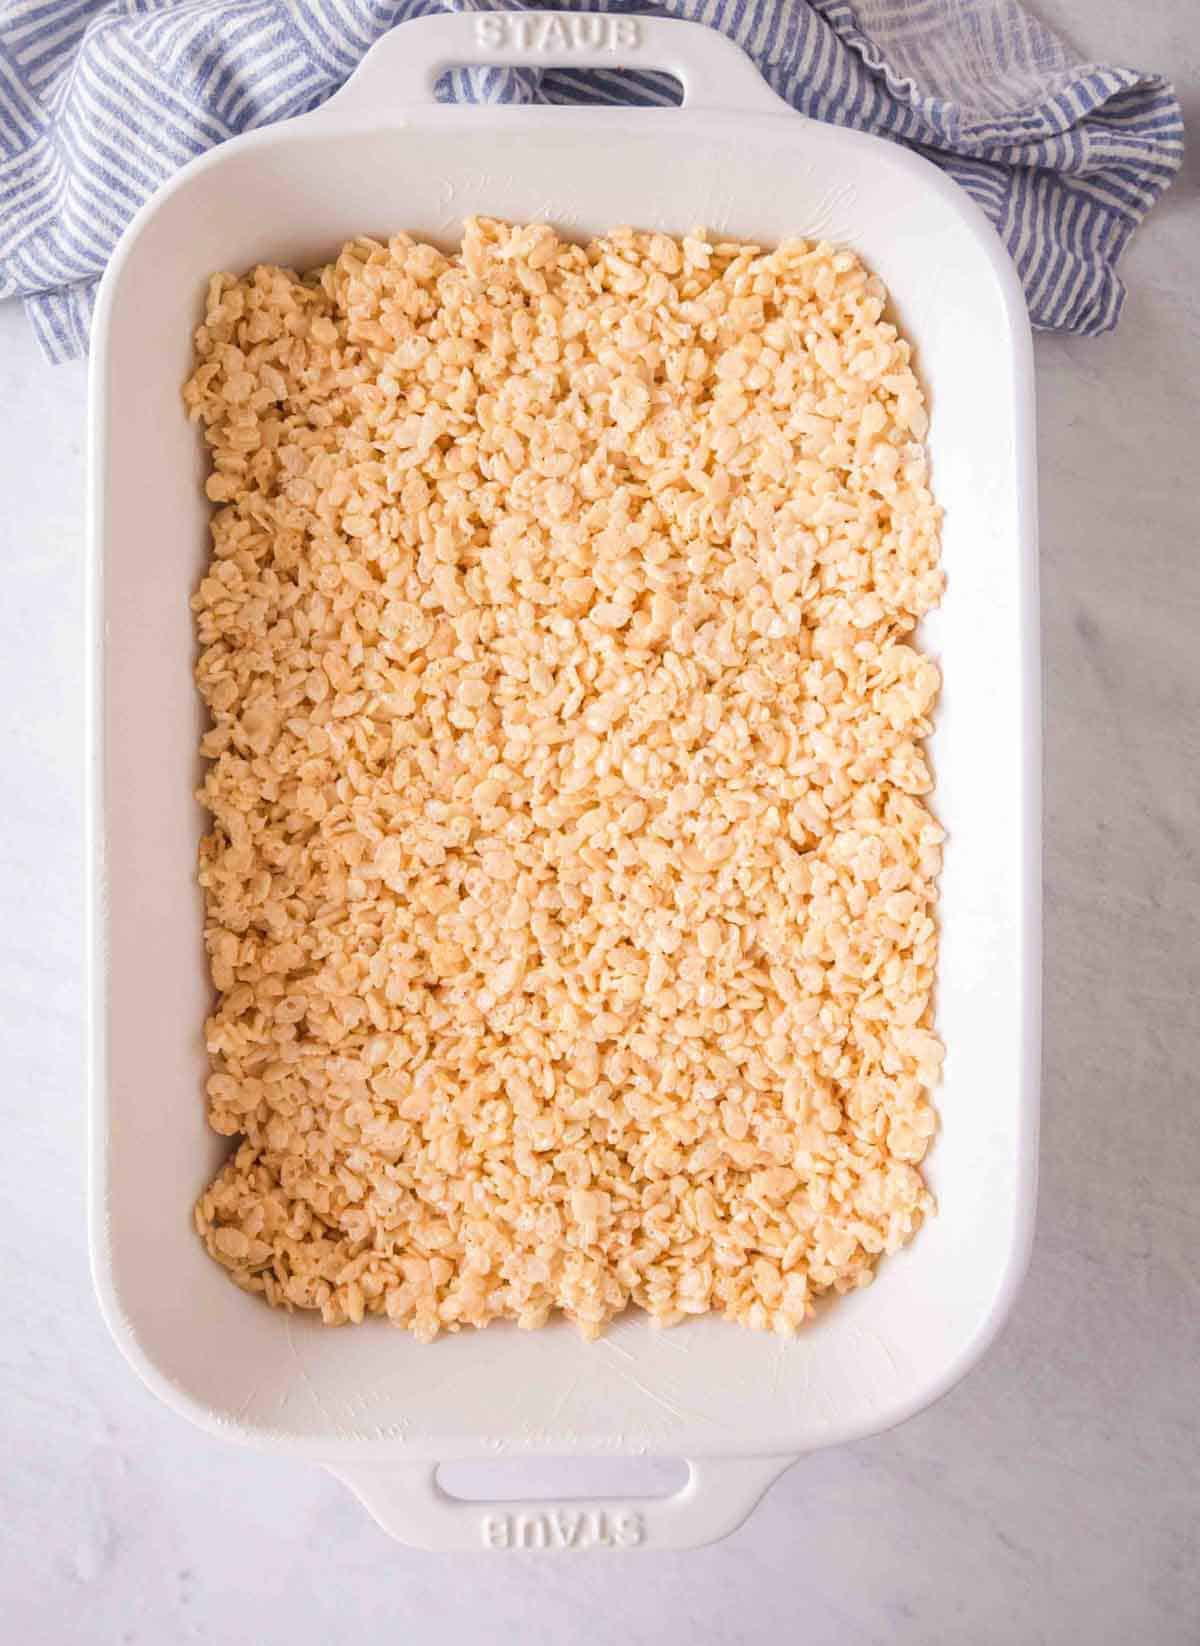 Rice krispie treats smoothed out in a white baking dish.